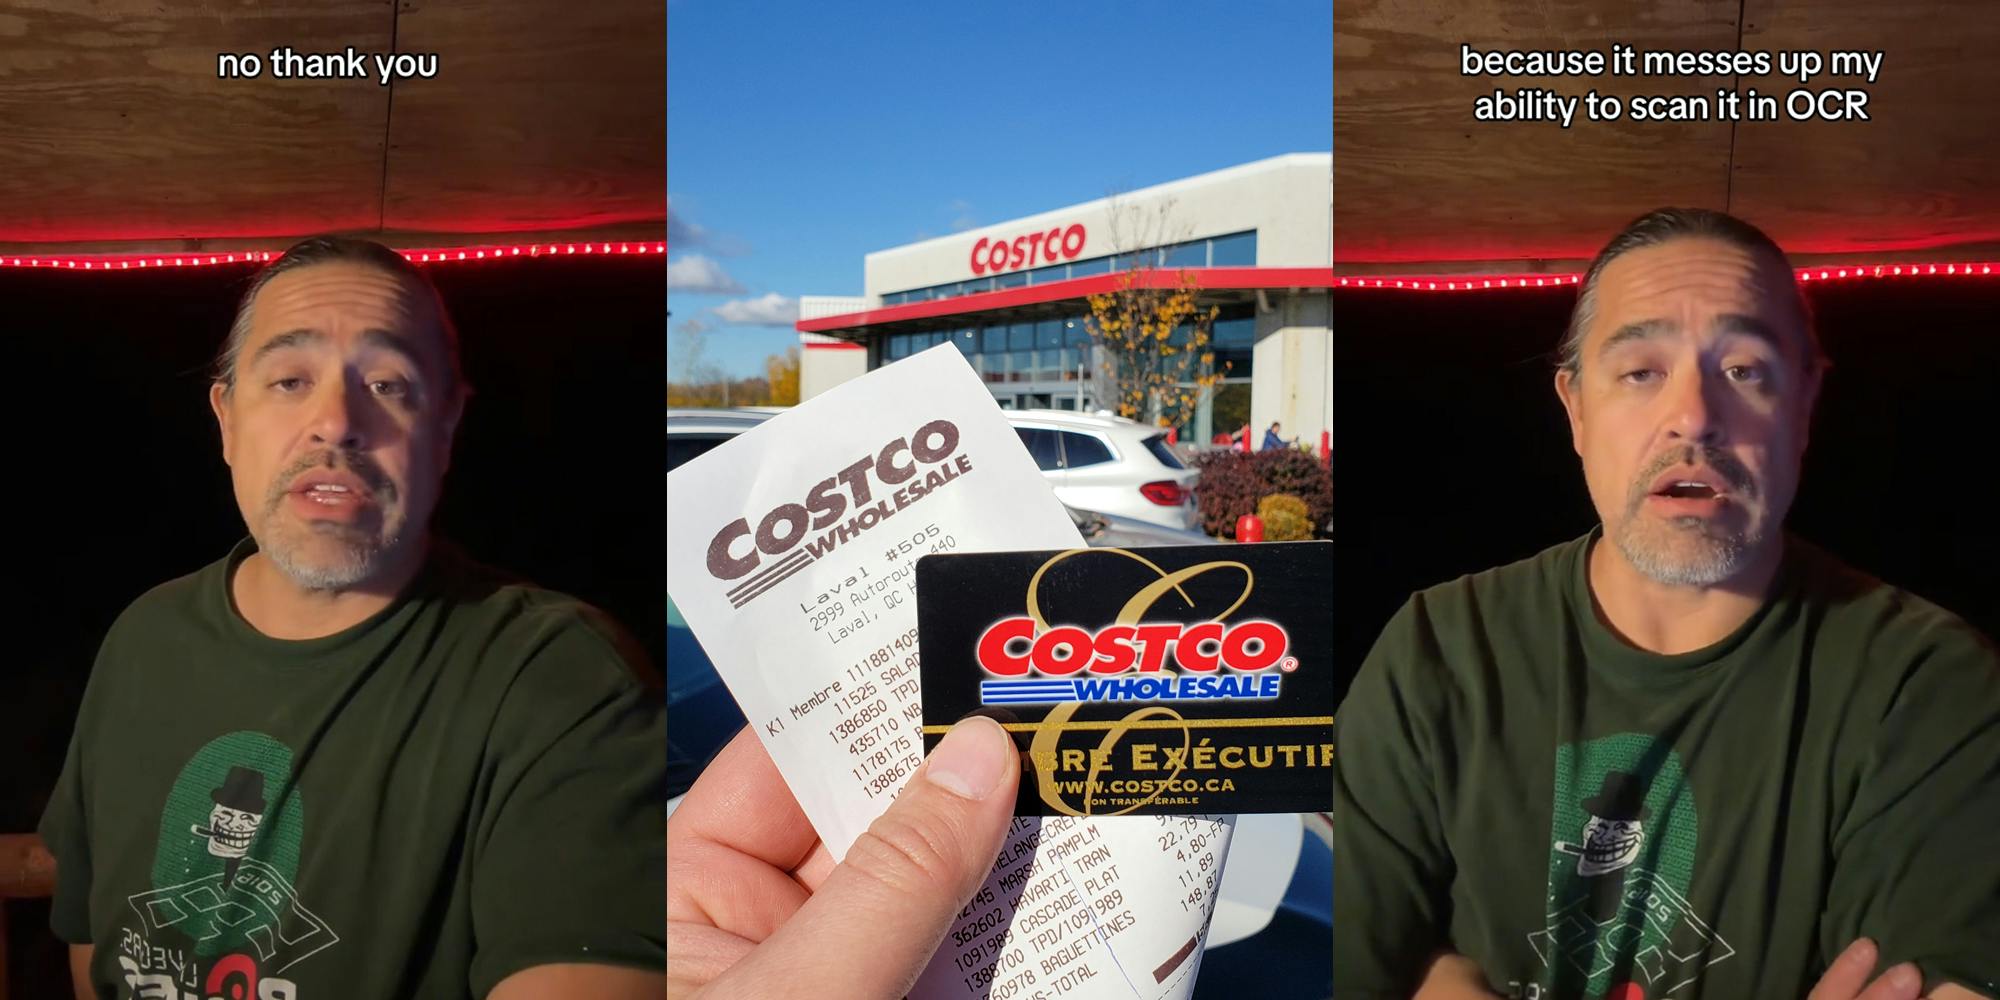 Costco customer speaking with caption "no thank you" (l) Costco customer with receipt and card outside in front of Costco building (c) Costco customer speaking with caption "because it messes up my ability to scan it in OCR" (r)